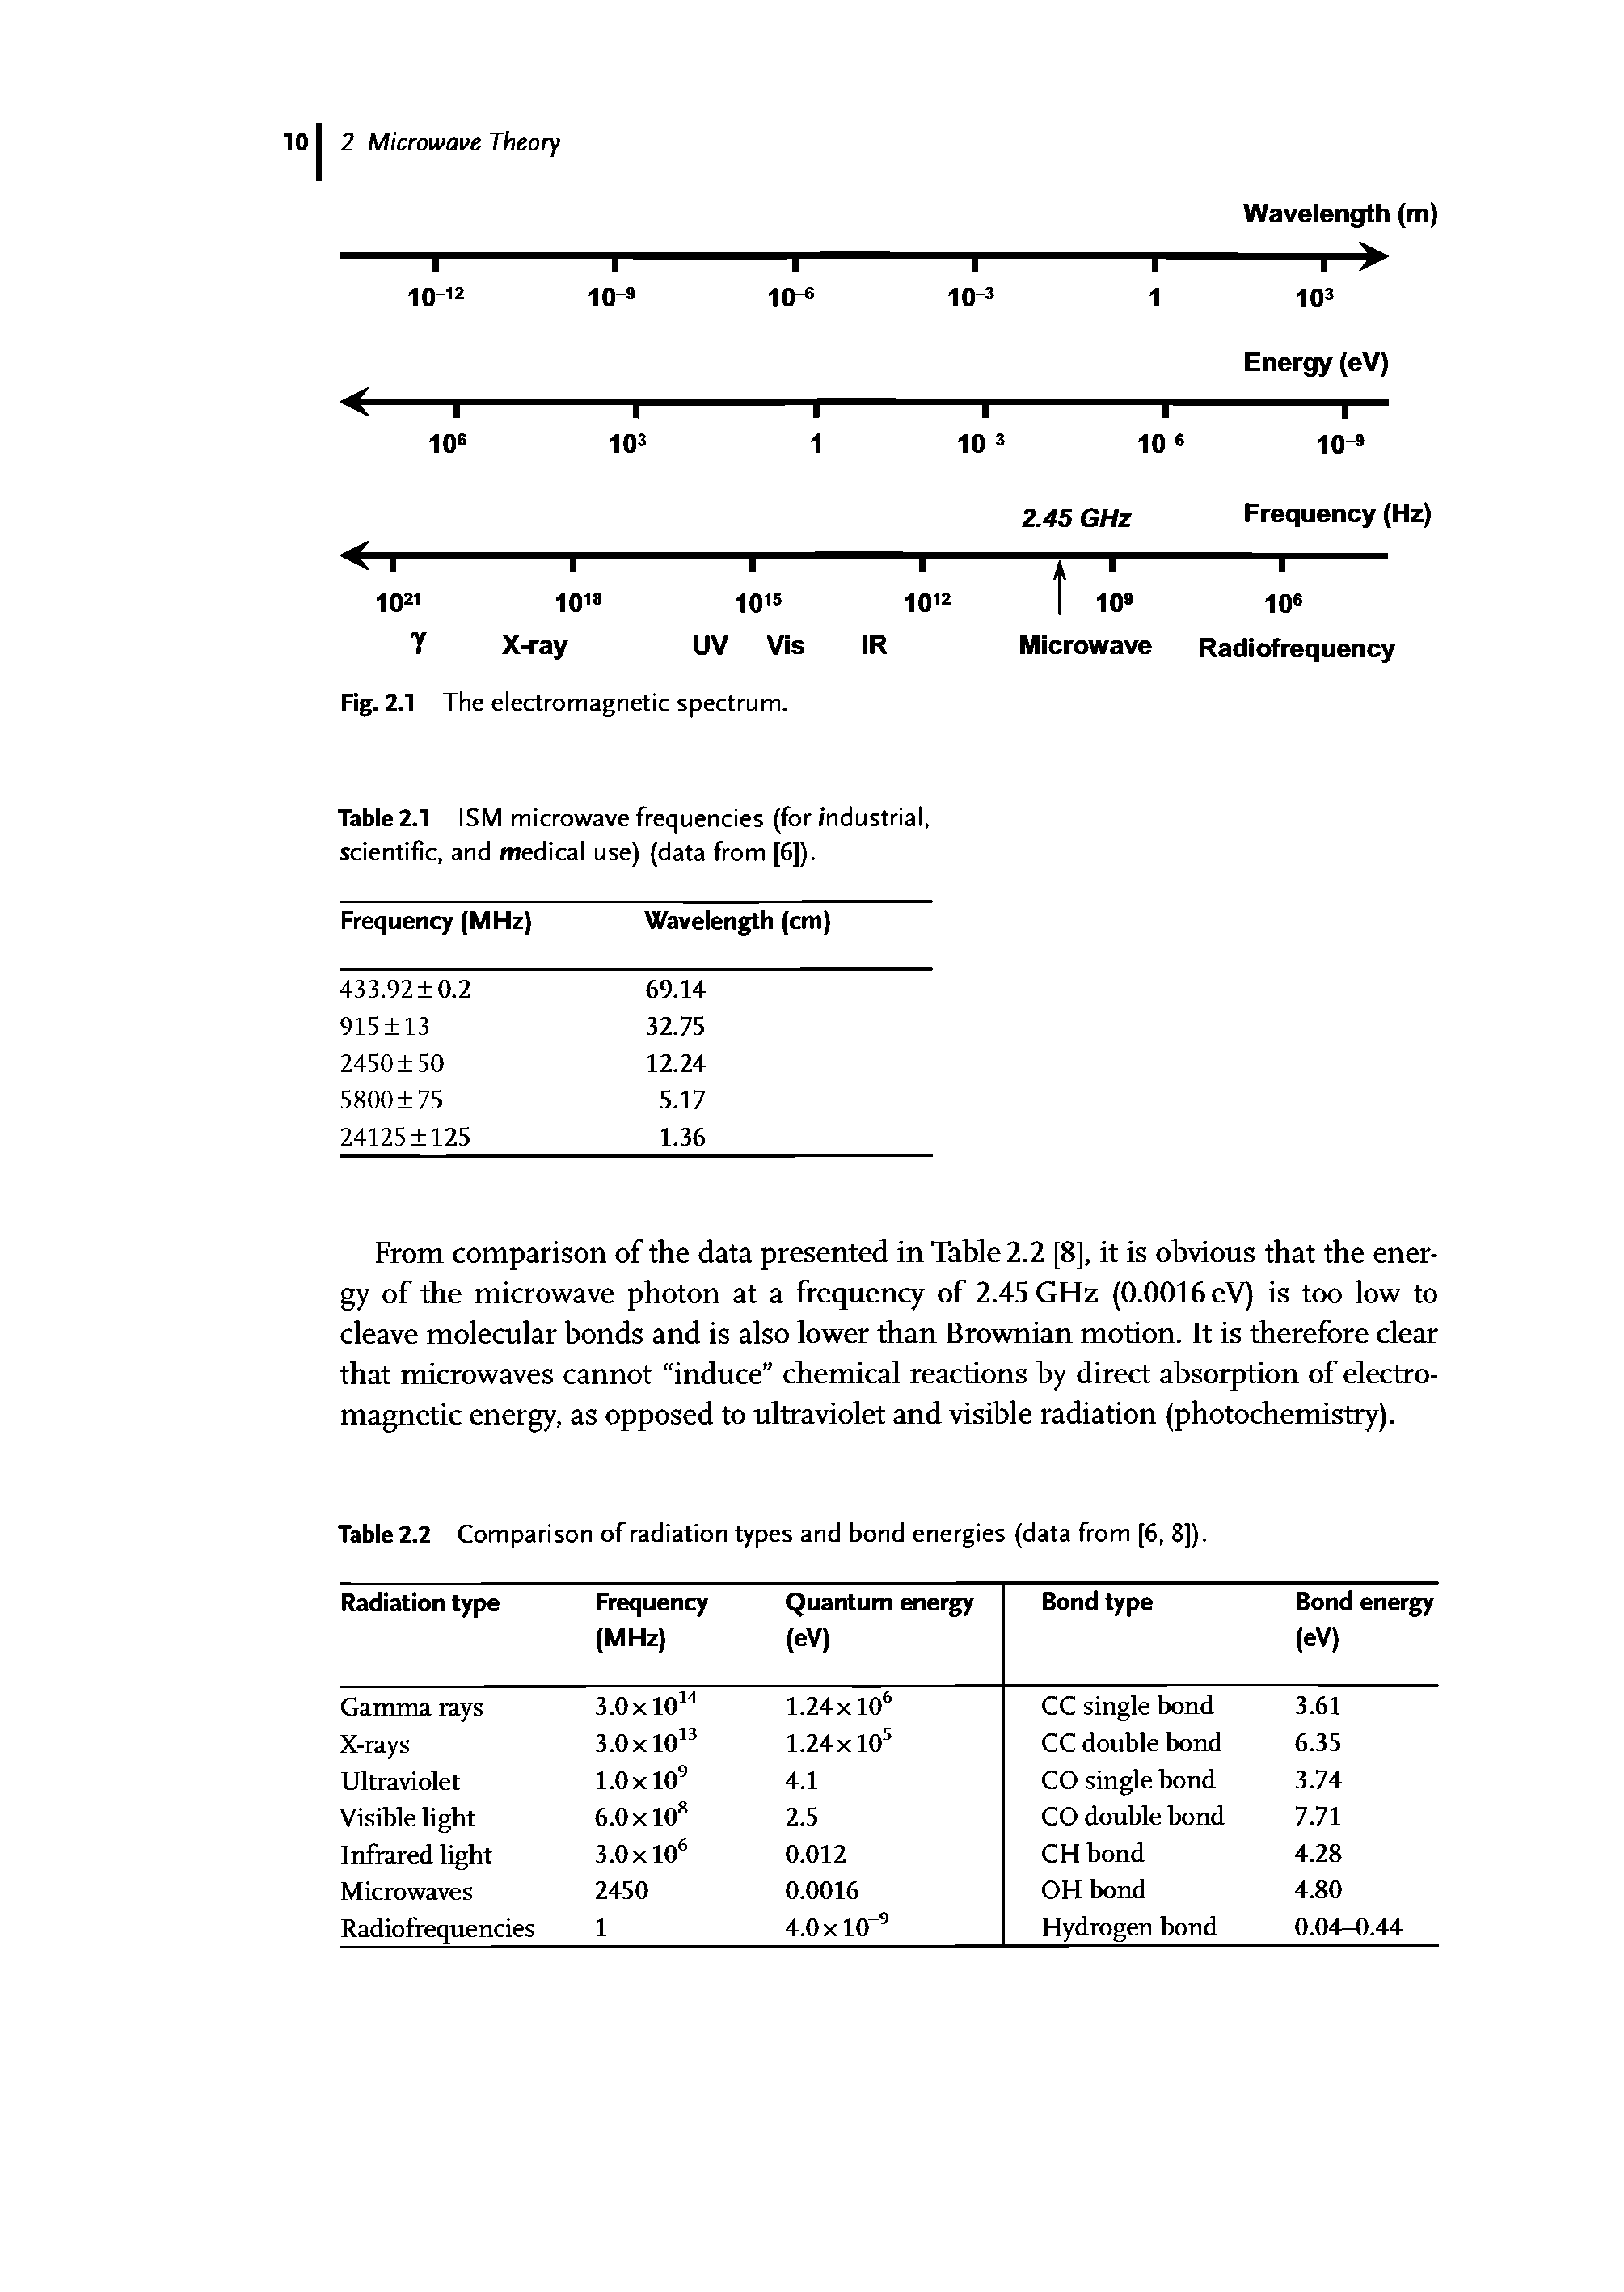 Table 2.2 Comparison of radiation types and bond energies (data from [6, 8]).